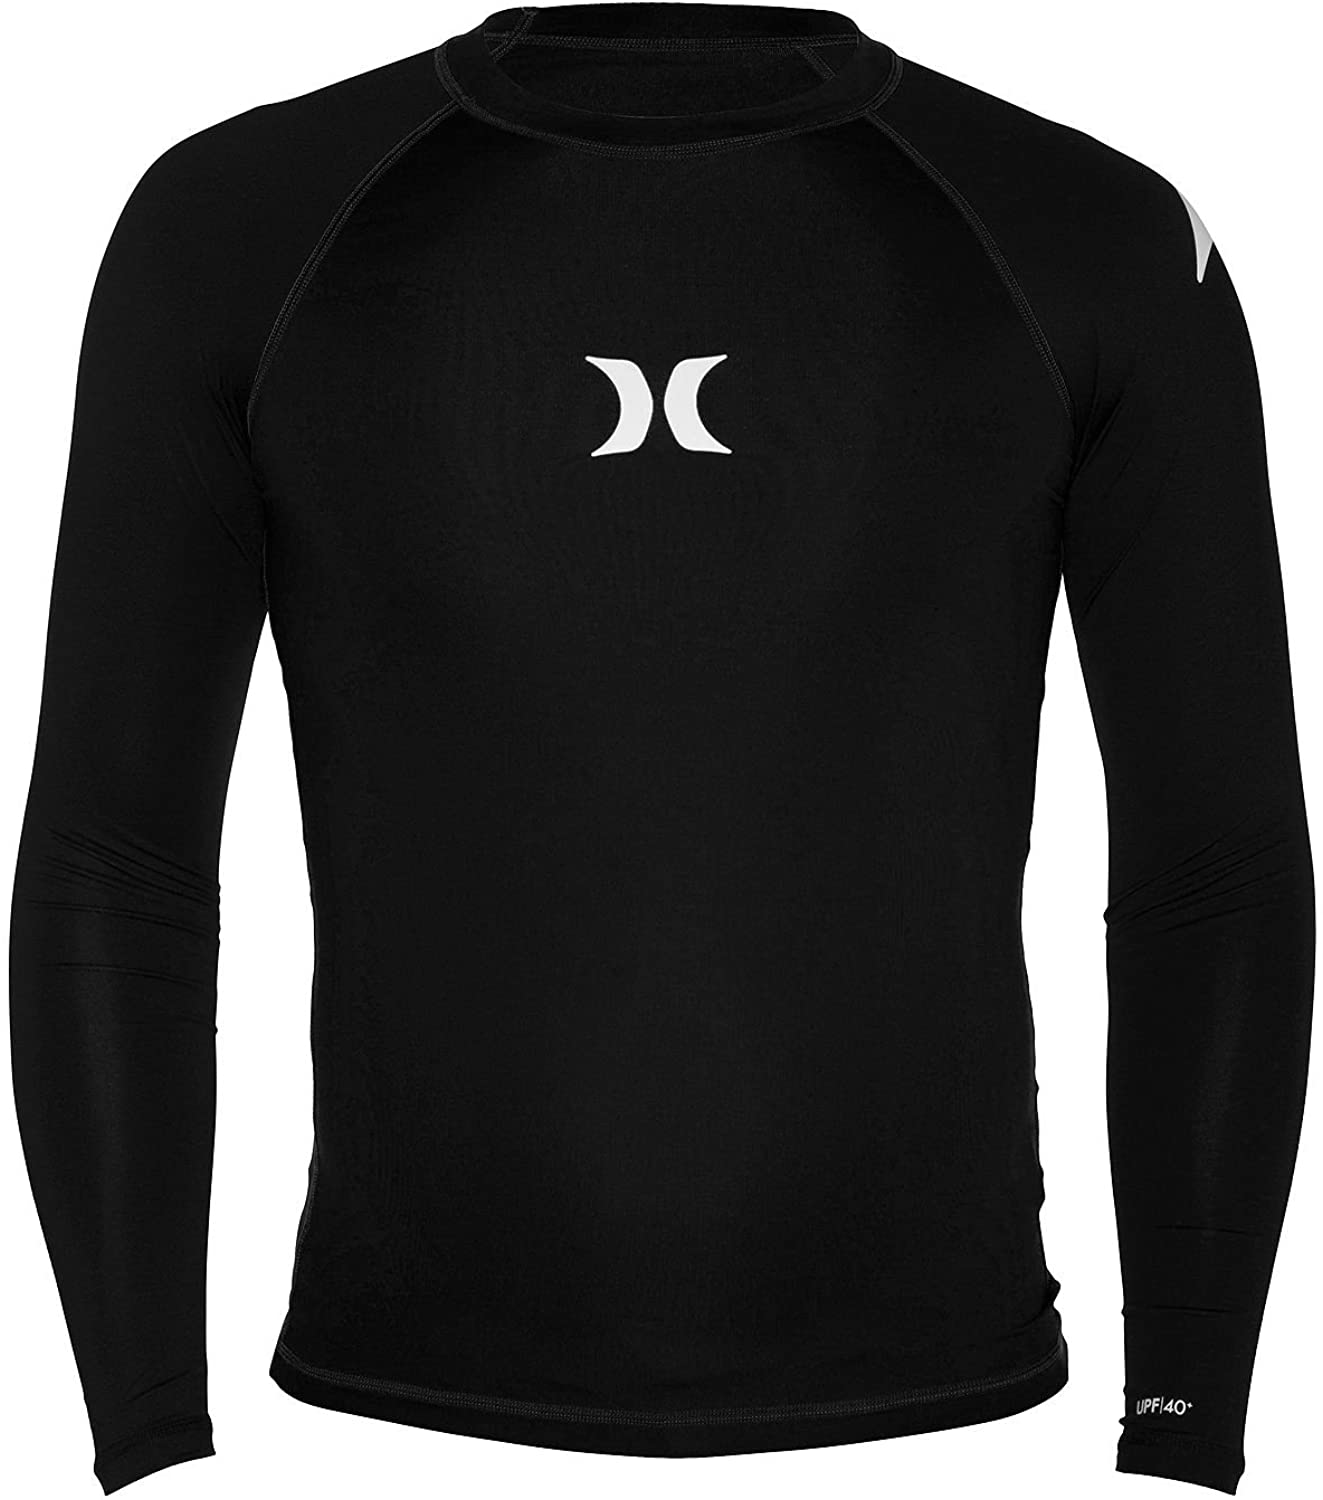 Hurley Boys One & Only L/S Rashguard in Black 